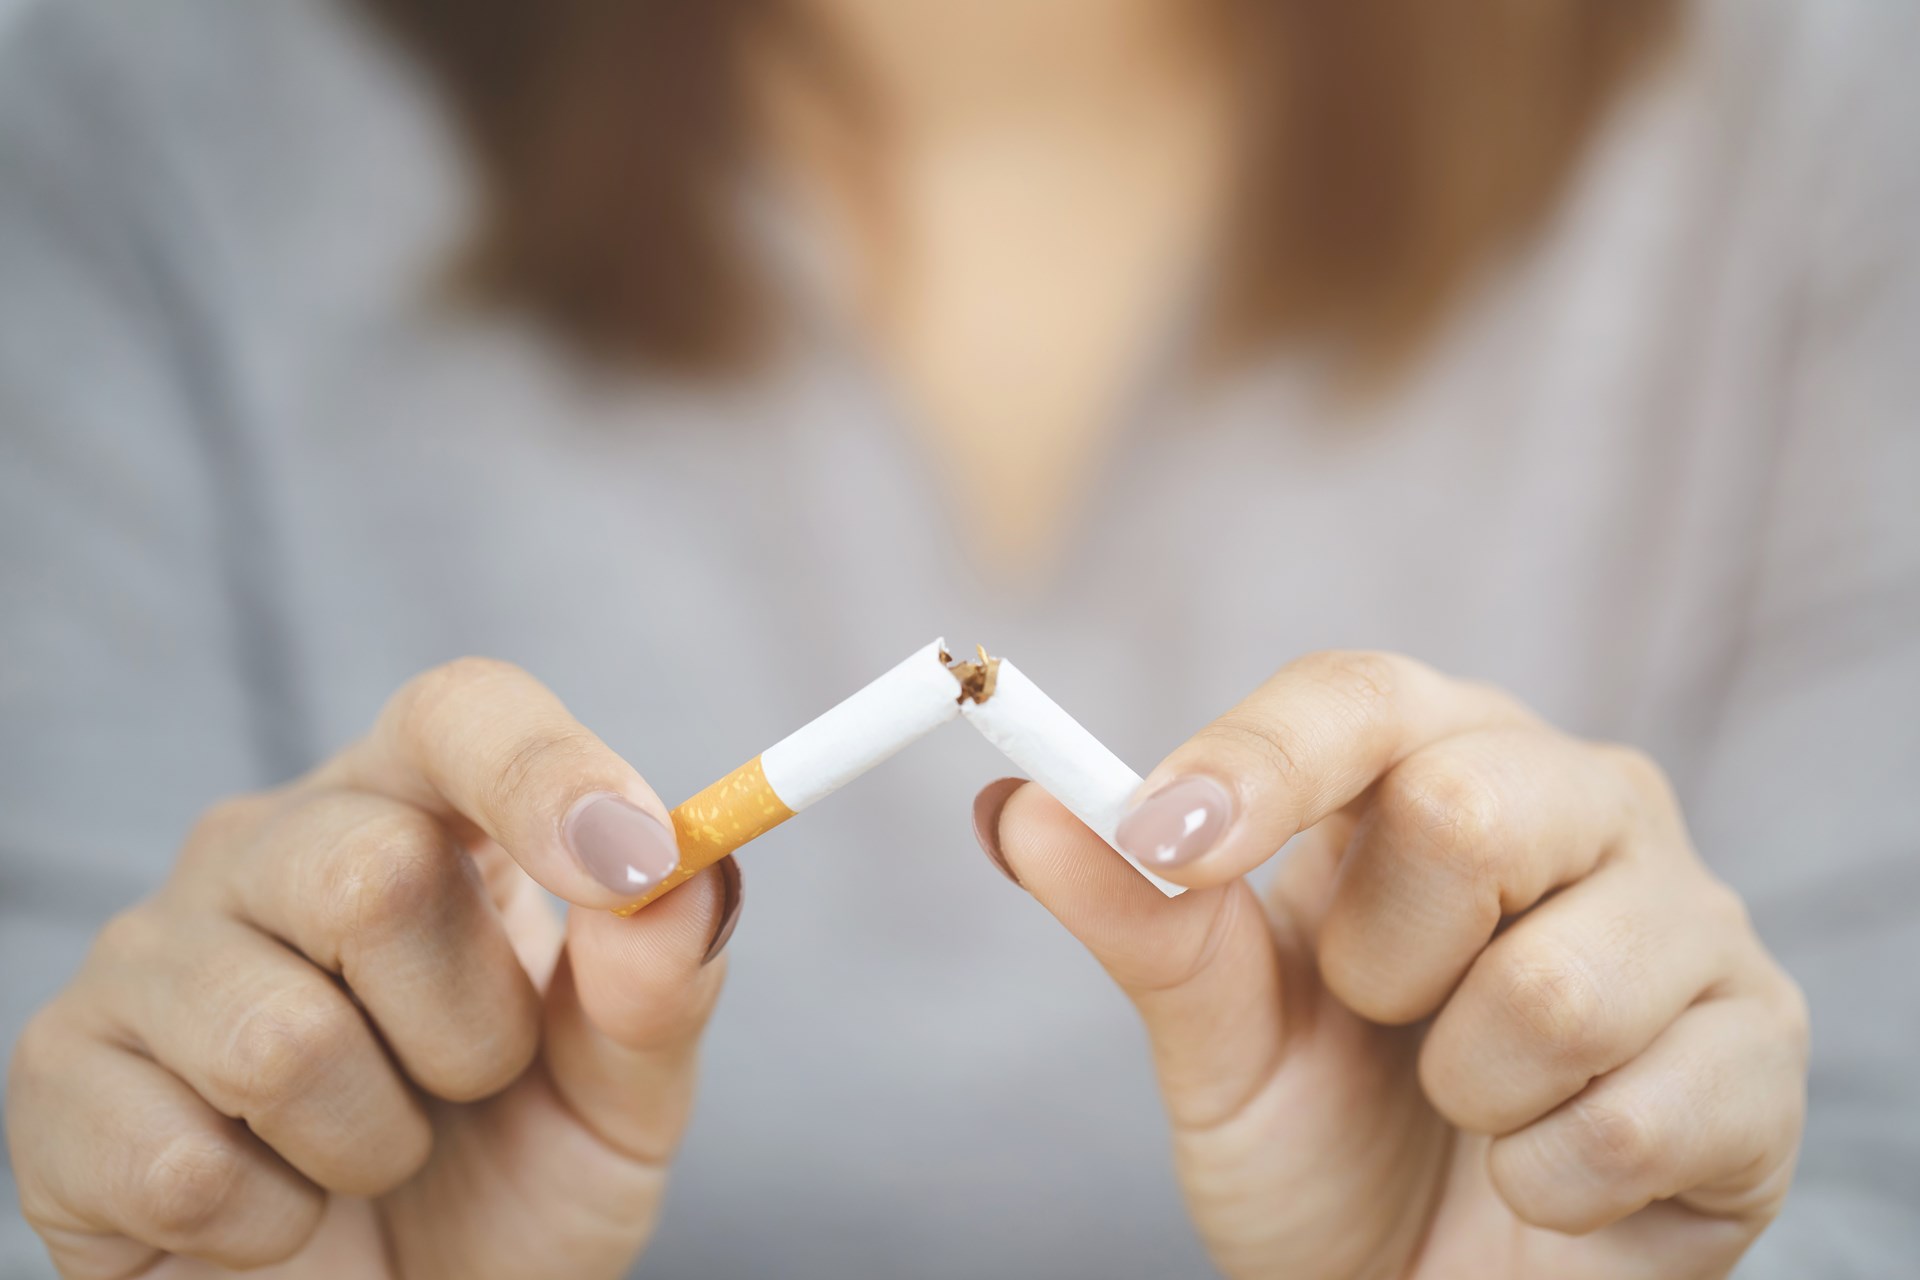 Is it a problem? Here's what you need to know about tobacco-free oral  nicotine